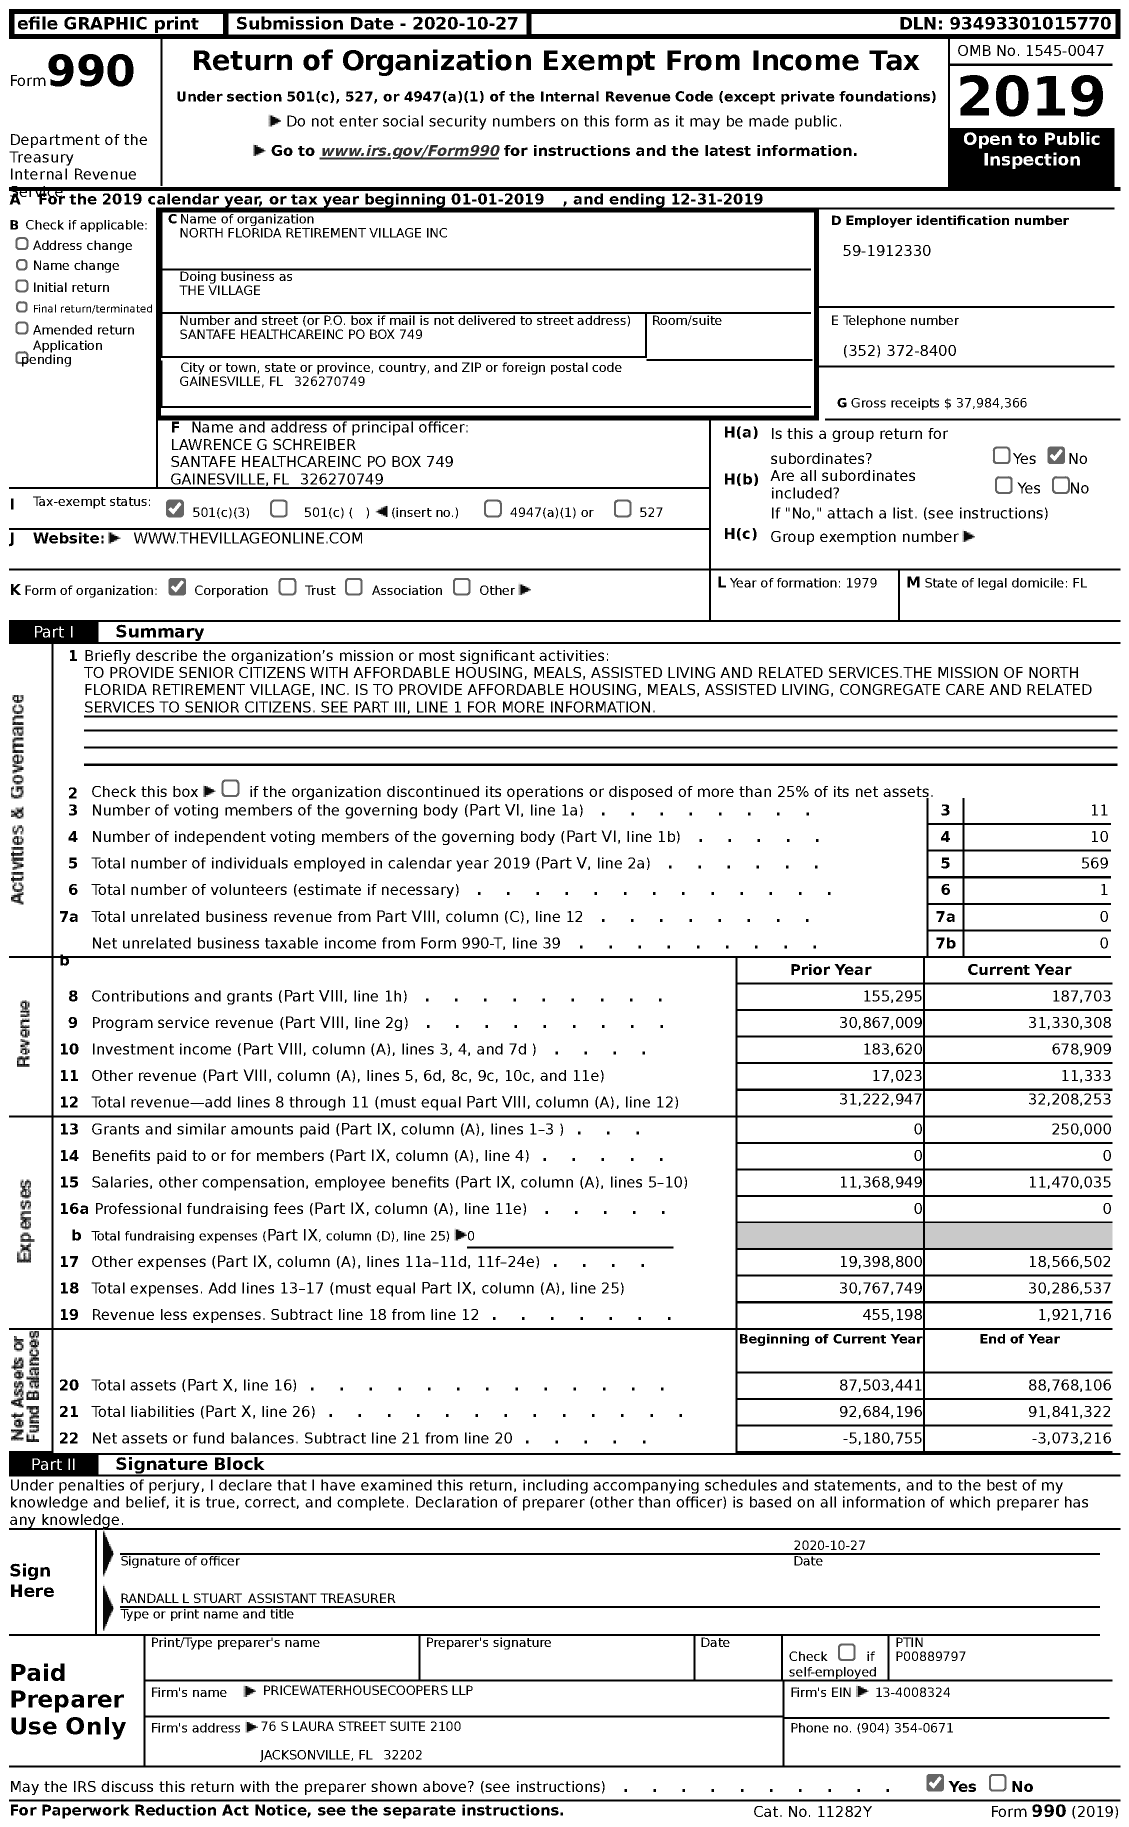 Image of first page of 2019 Form 990 for The Village / North Florida Retirement Village Inc